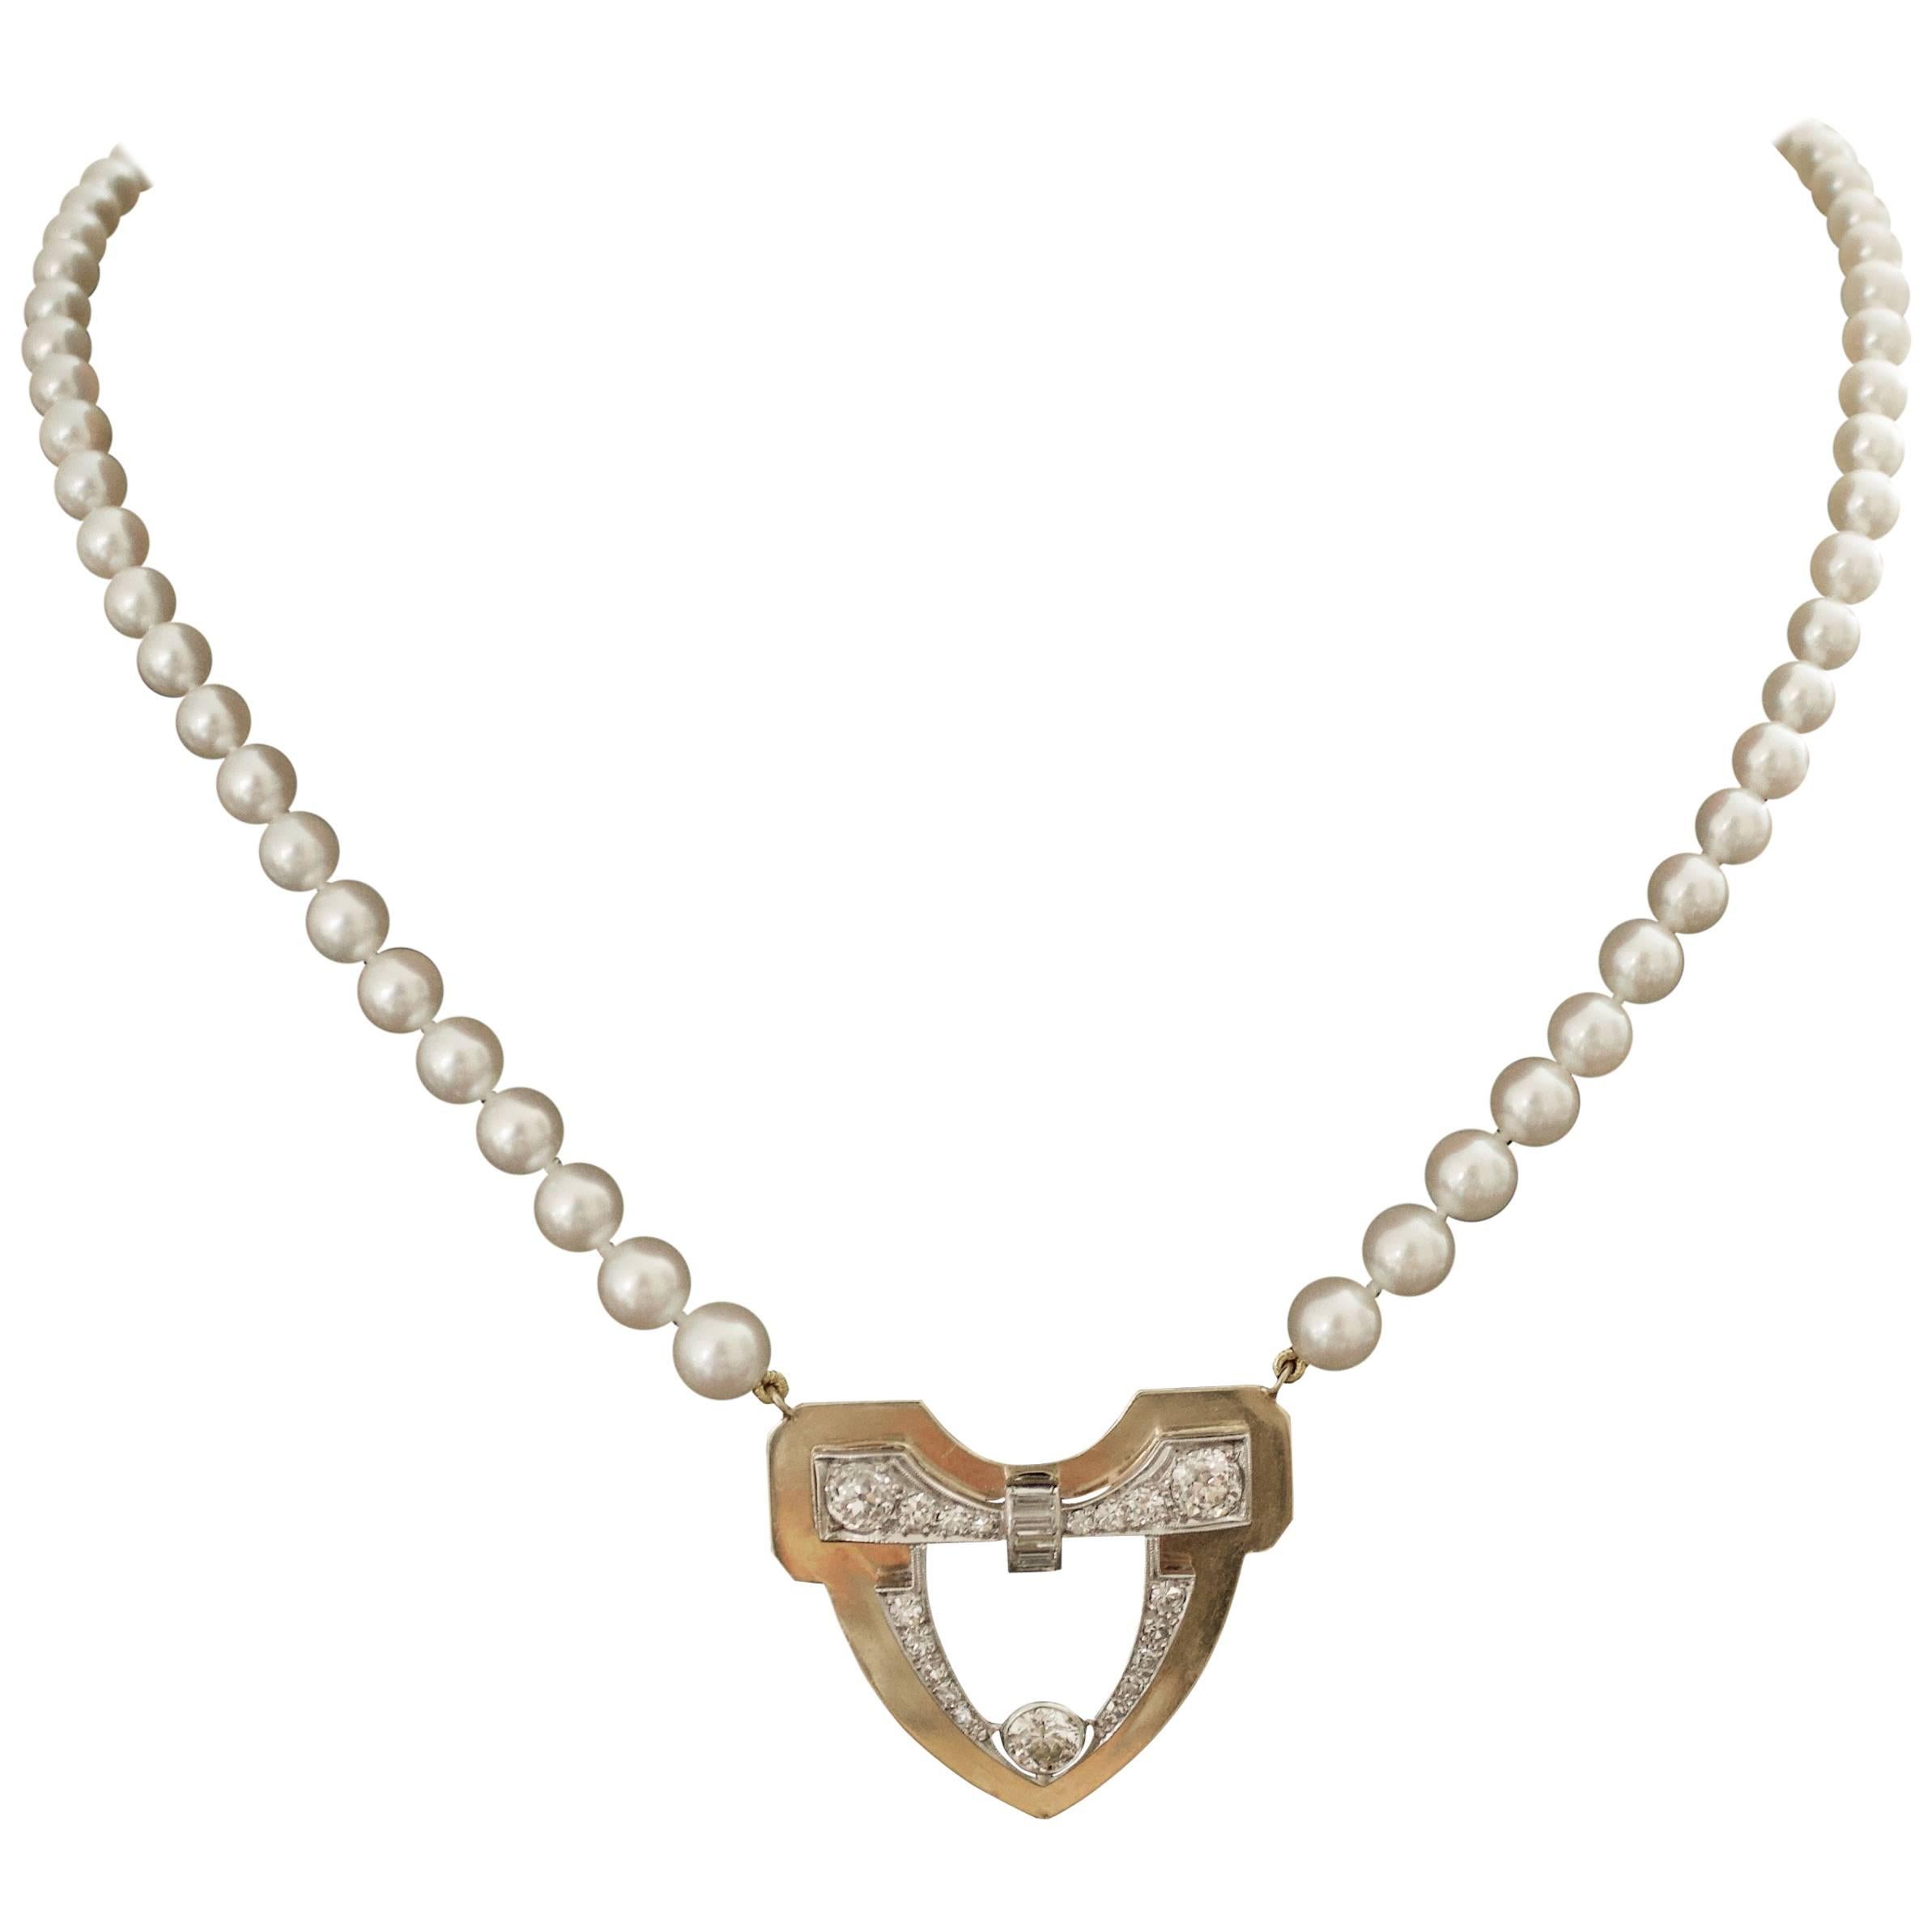 Platinum and Yellow Gold Diamond and Pearl Necklace, circa 1930s-1950s